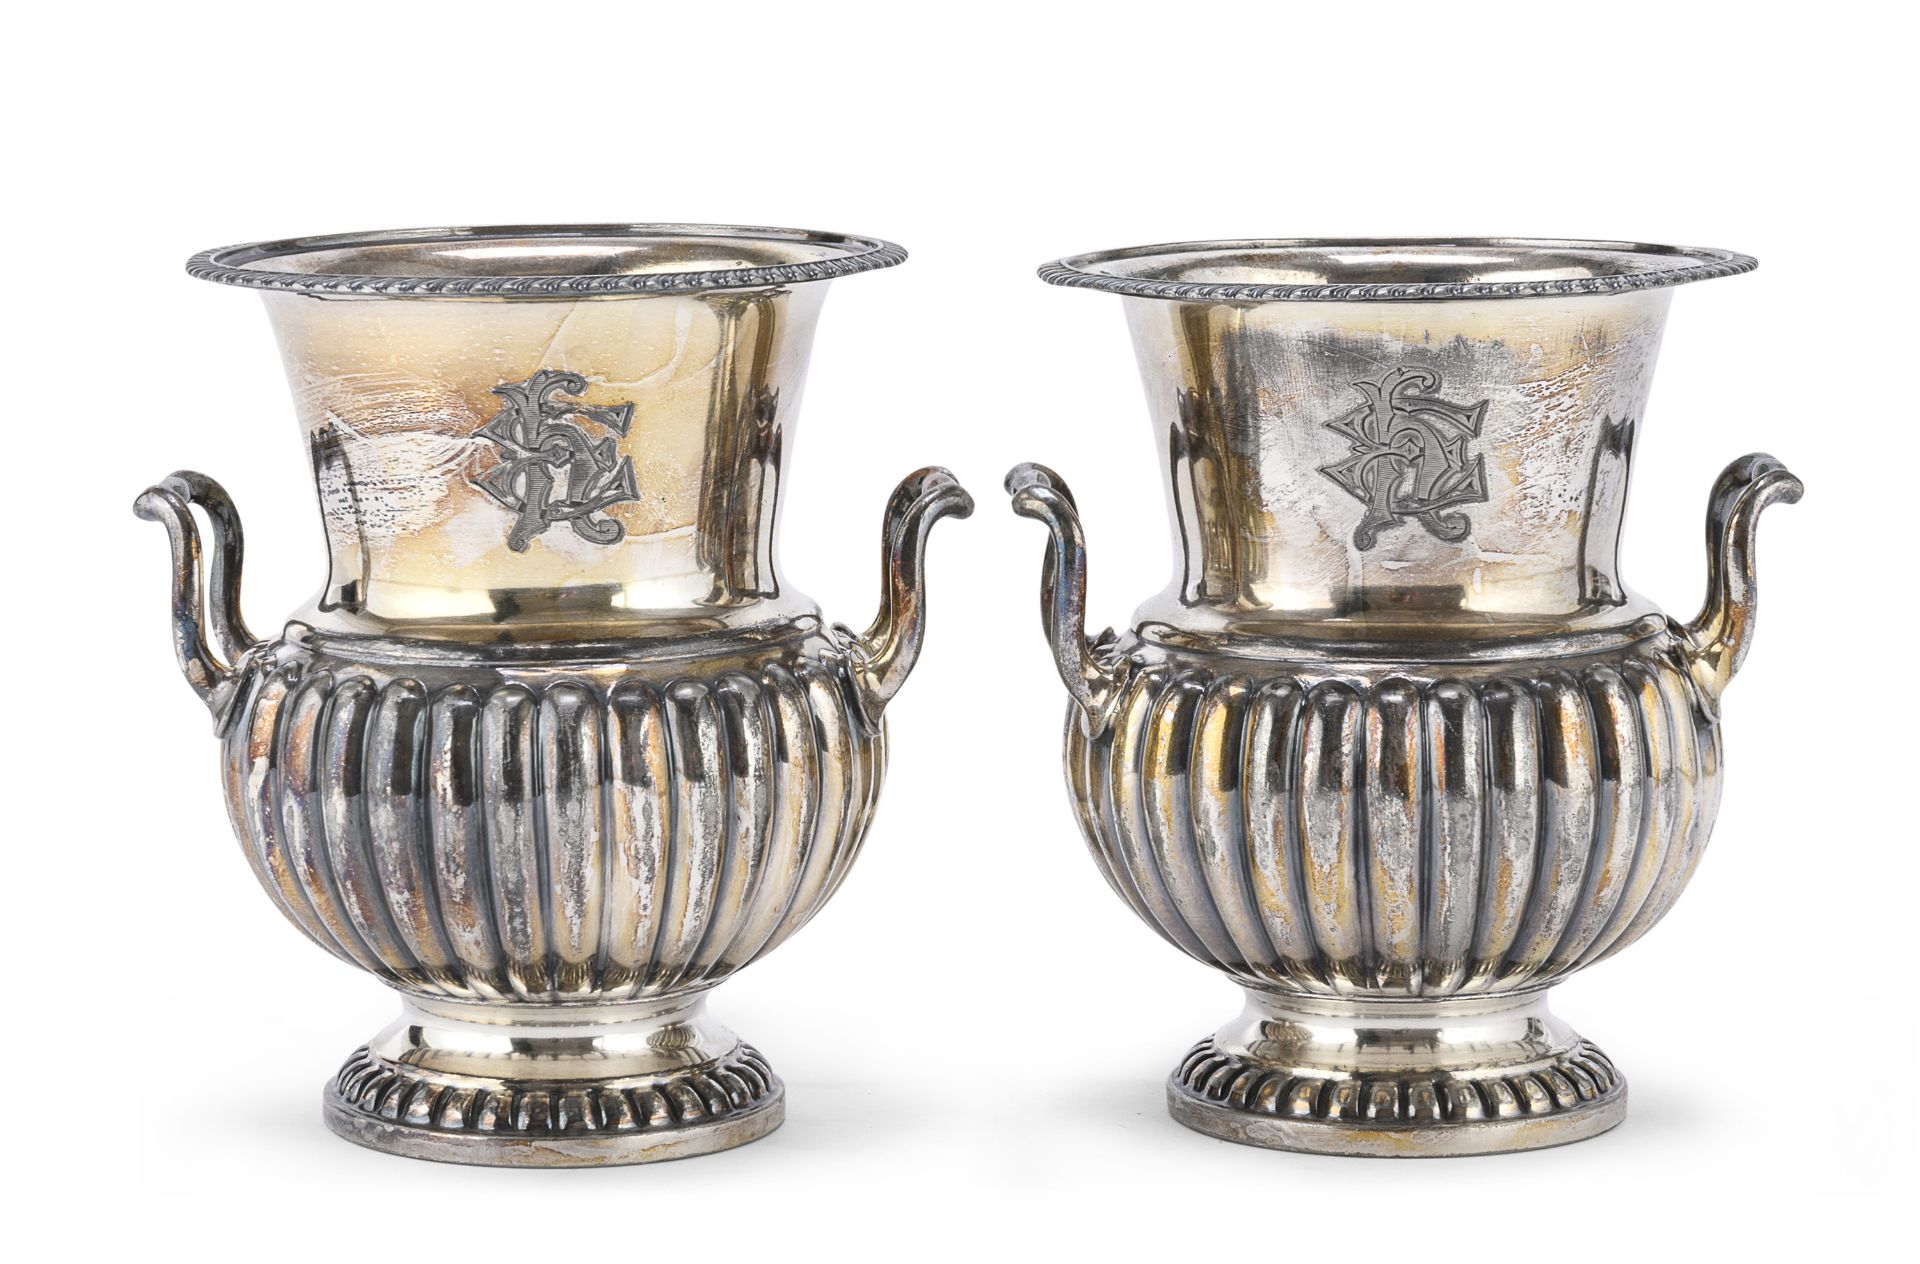 PAIR OF VASES IN SHEFFIELD ENGLAND LATE 19TH CENTURY